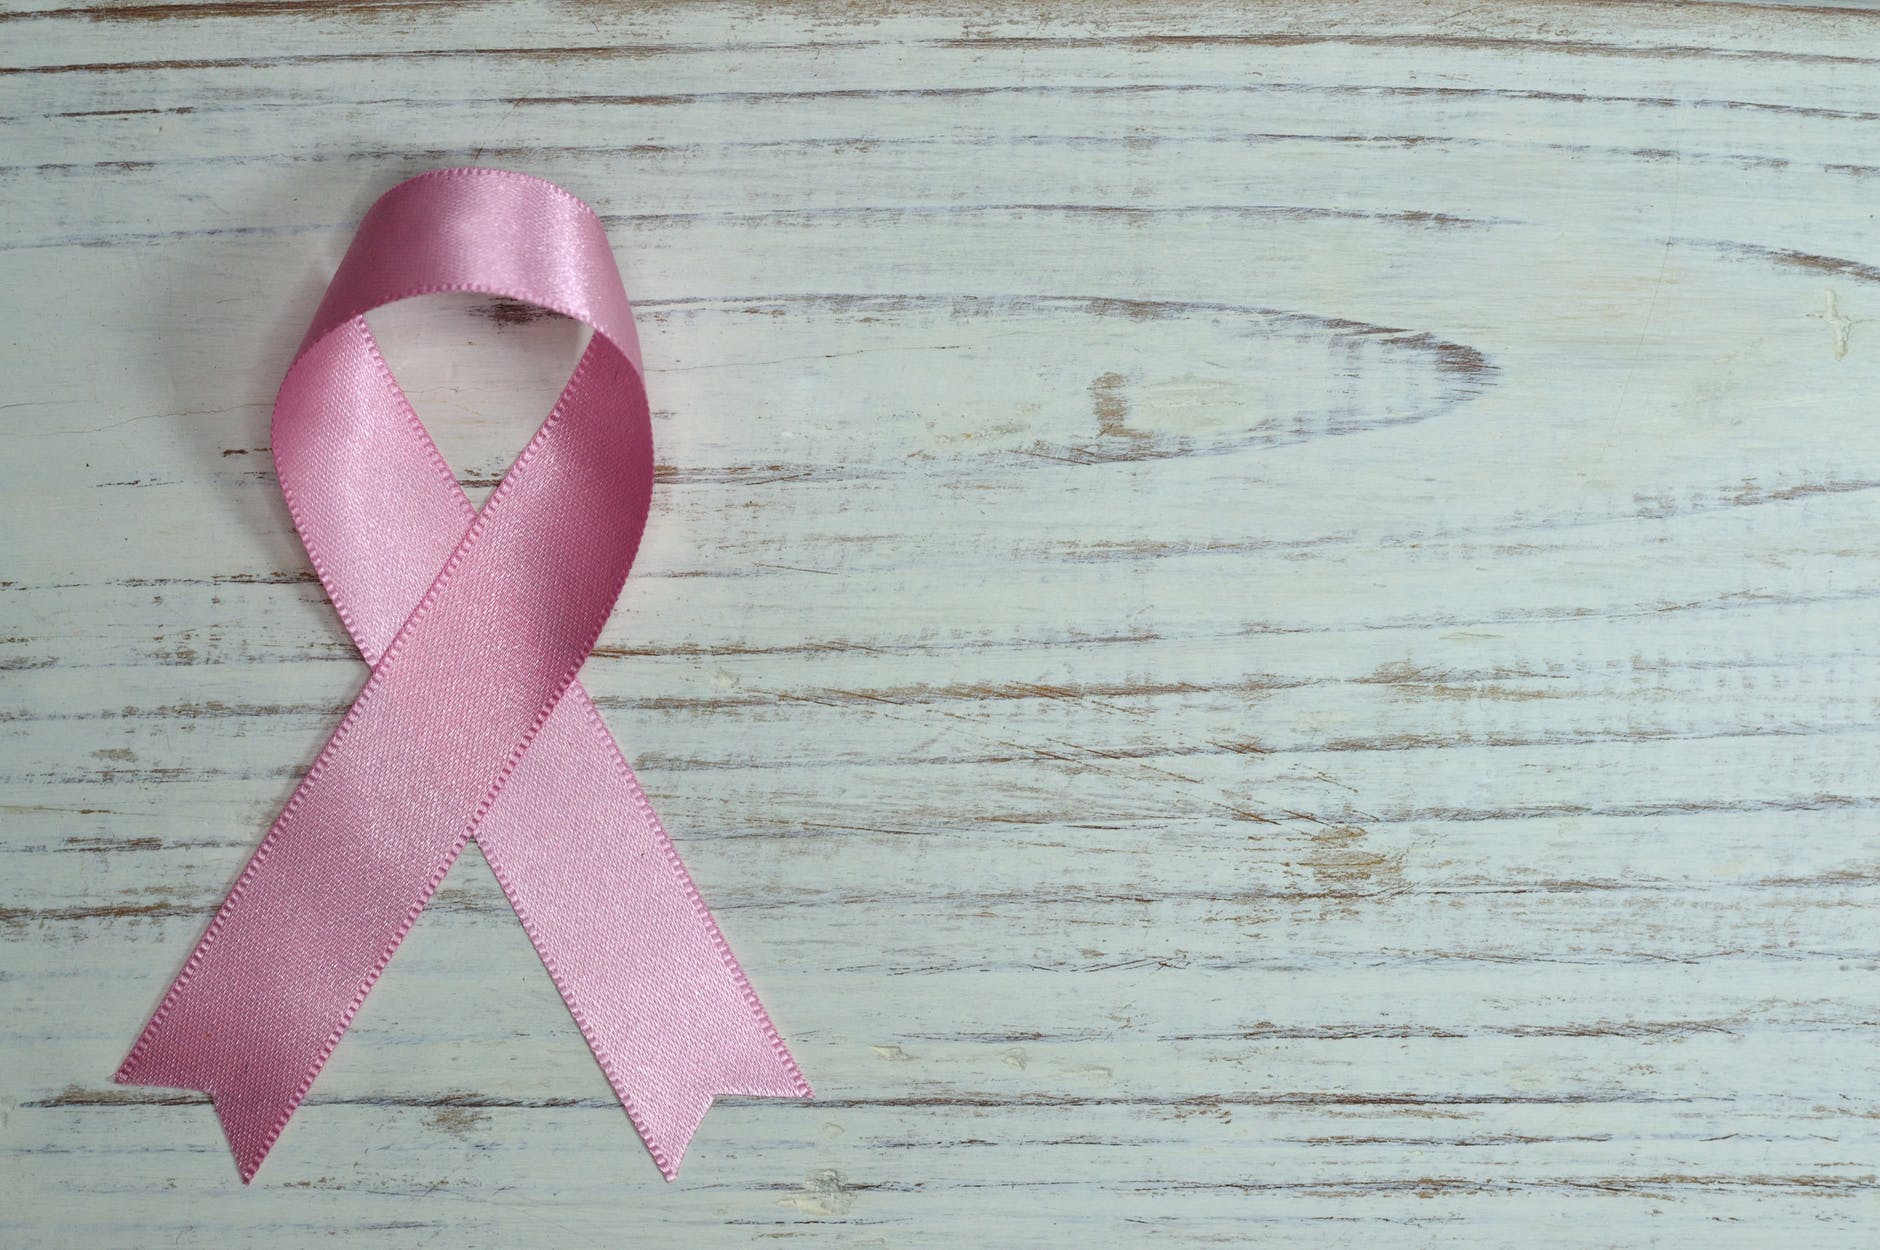 Breast Cancer Awareness: Reduce Your Risk With Physical Activity